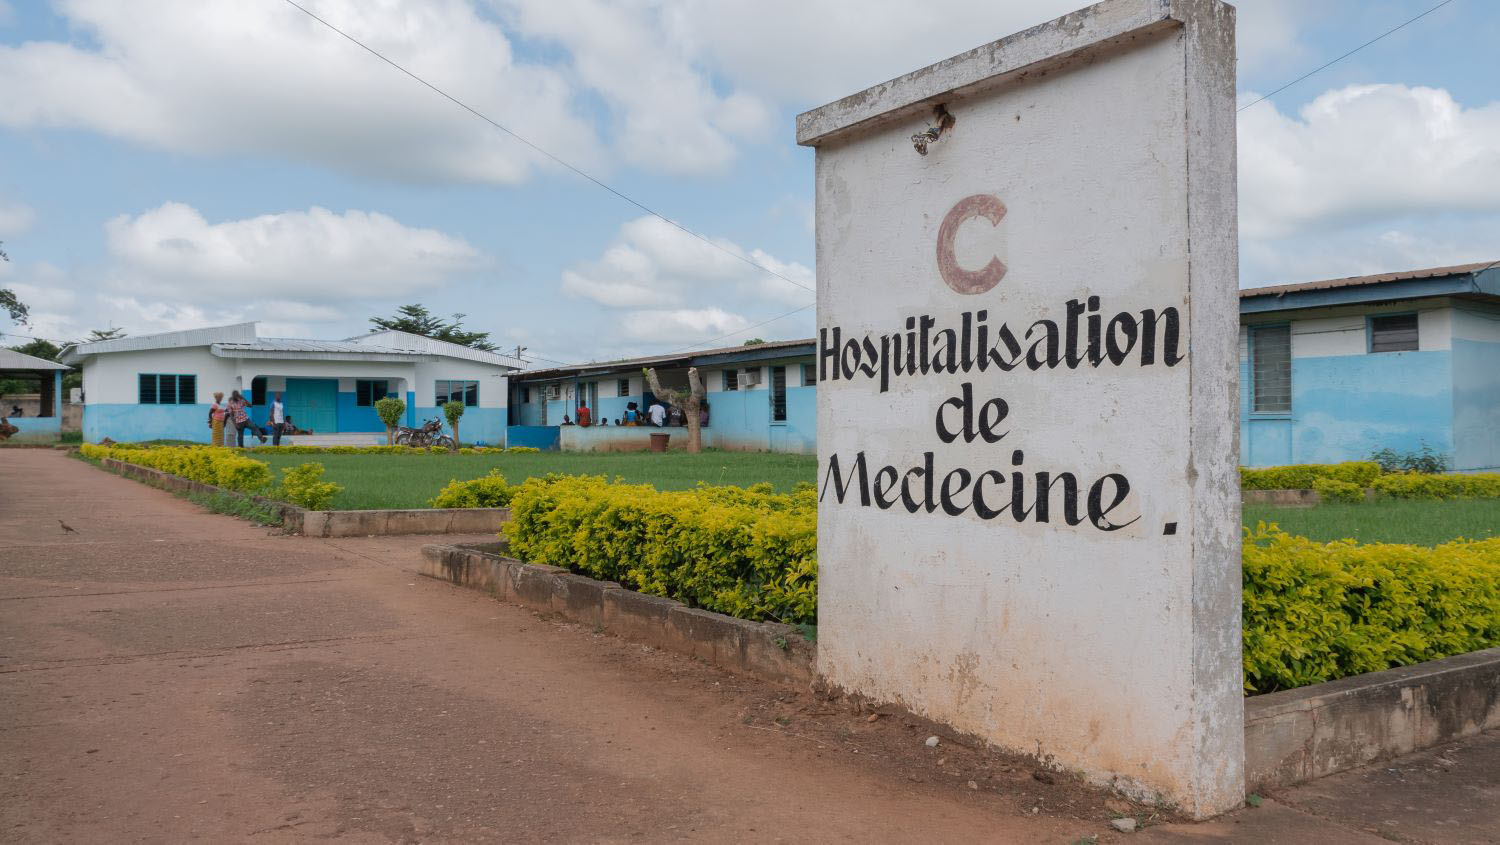 Hospital in cote d'ivoire